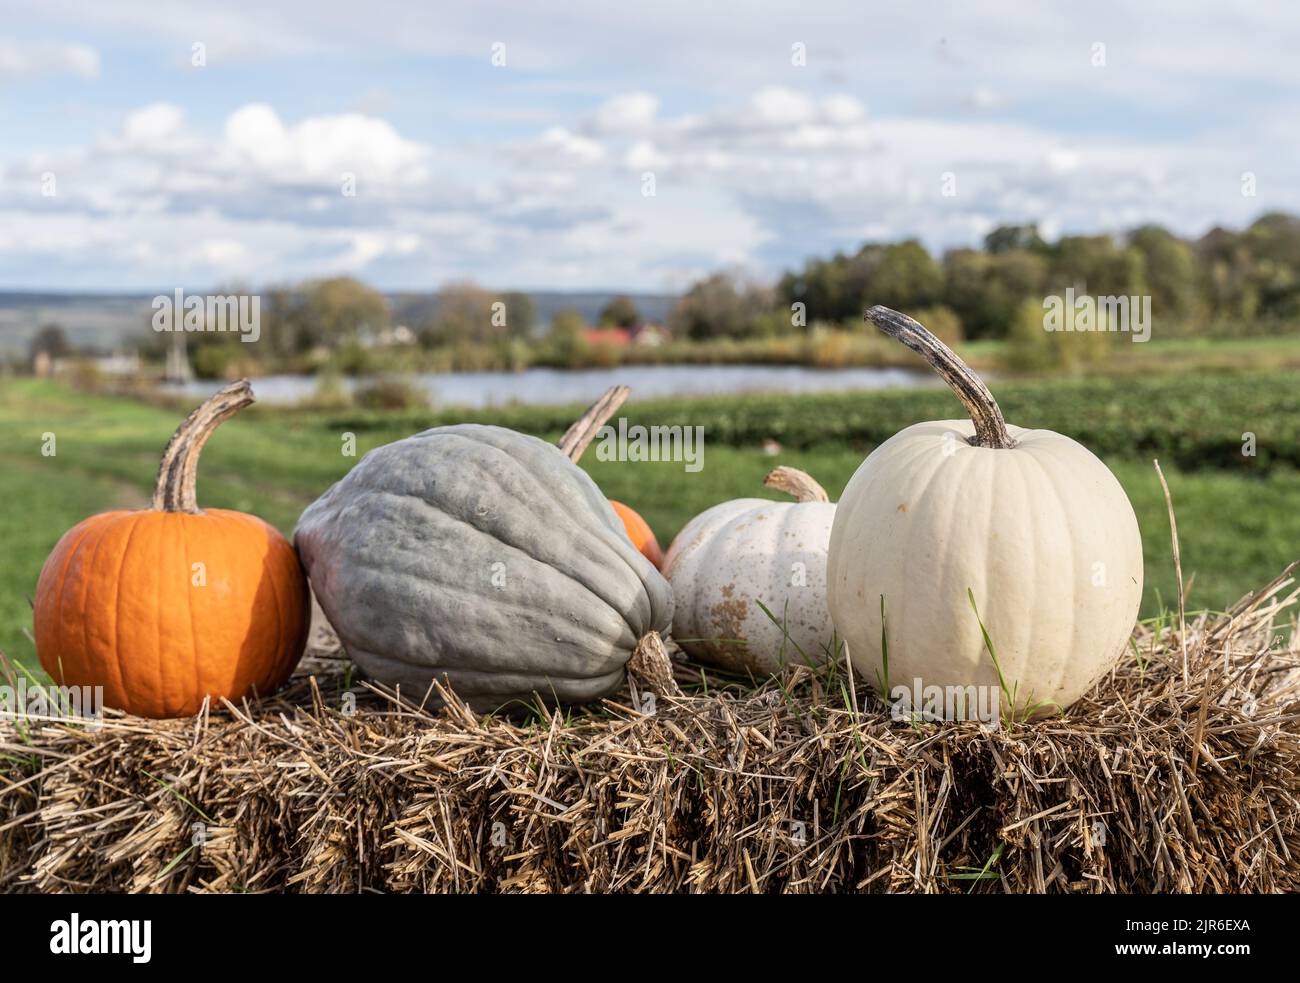 Pumpkins on for sale ready for Fall Holidays at local Orchard in the Finger Lakes Region of New York. Stock Photo